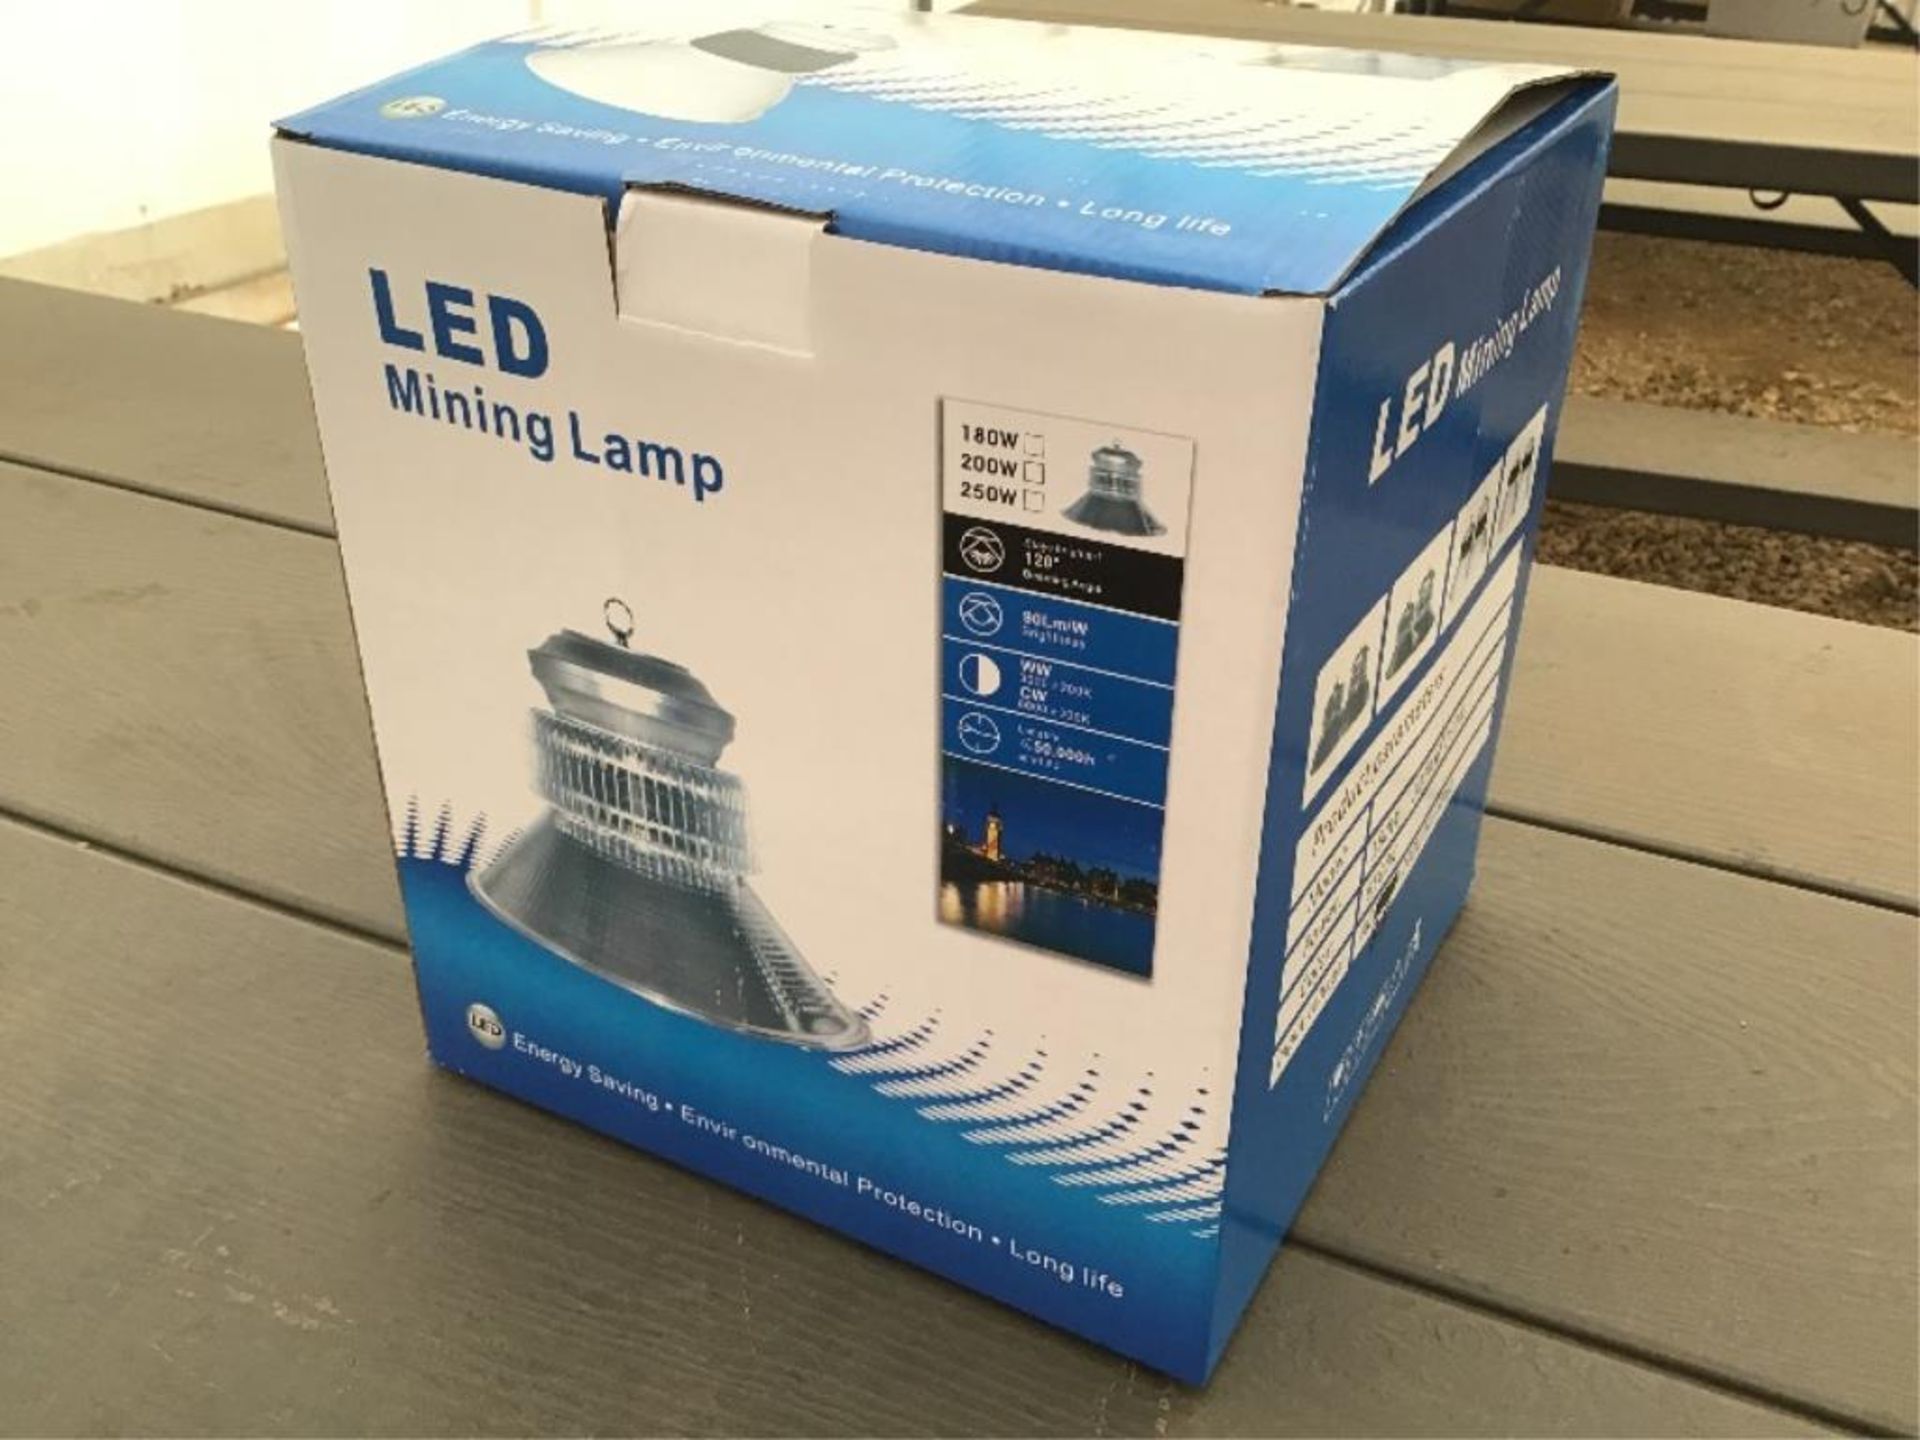 LED Mining Lamp 200Watt 85V-240V Perfect for Hanging in Shops, Cold Storage, Arenas, etc.